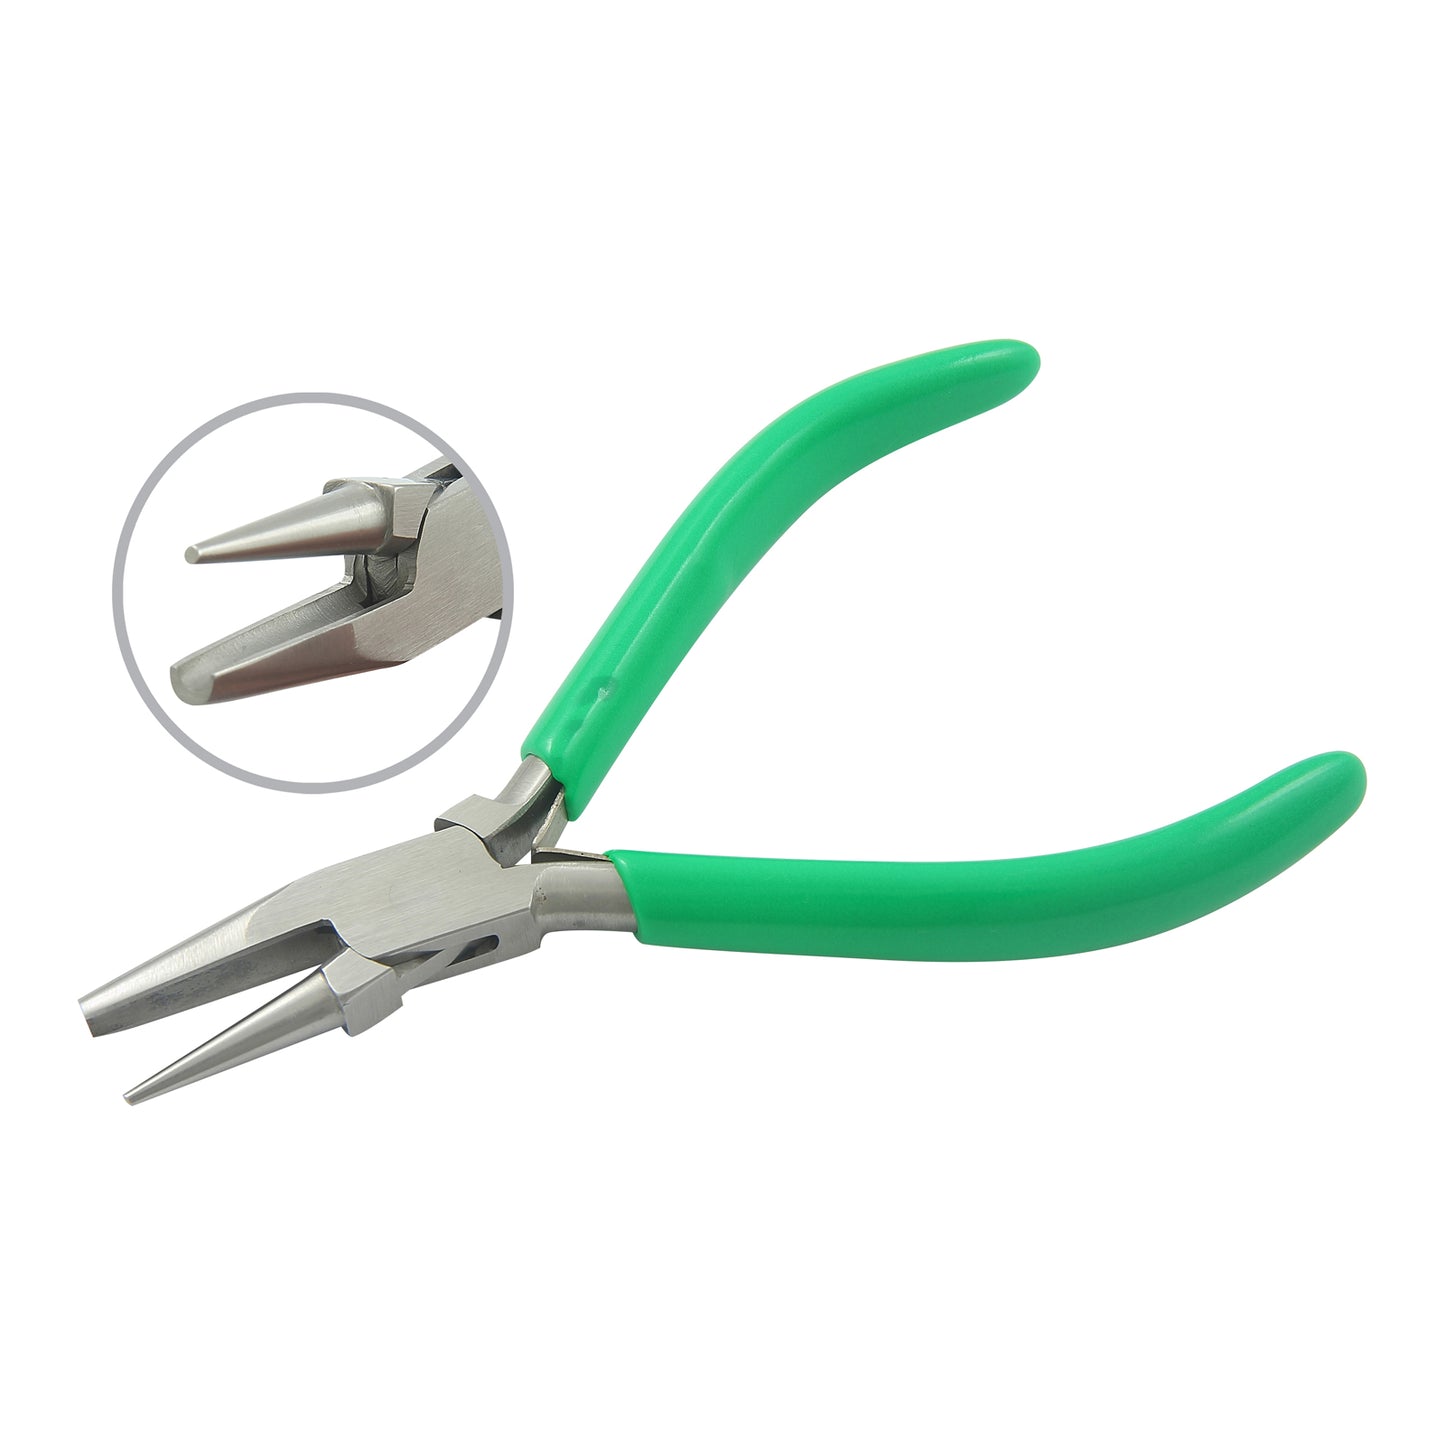 Round & concave plier. Size:130mm with double leaf spring and PVC handles